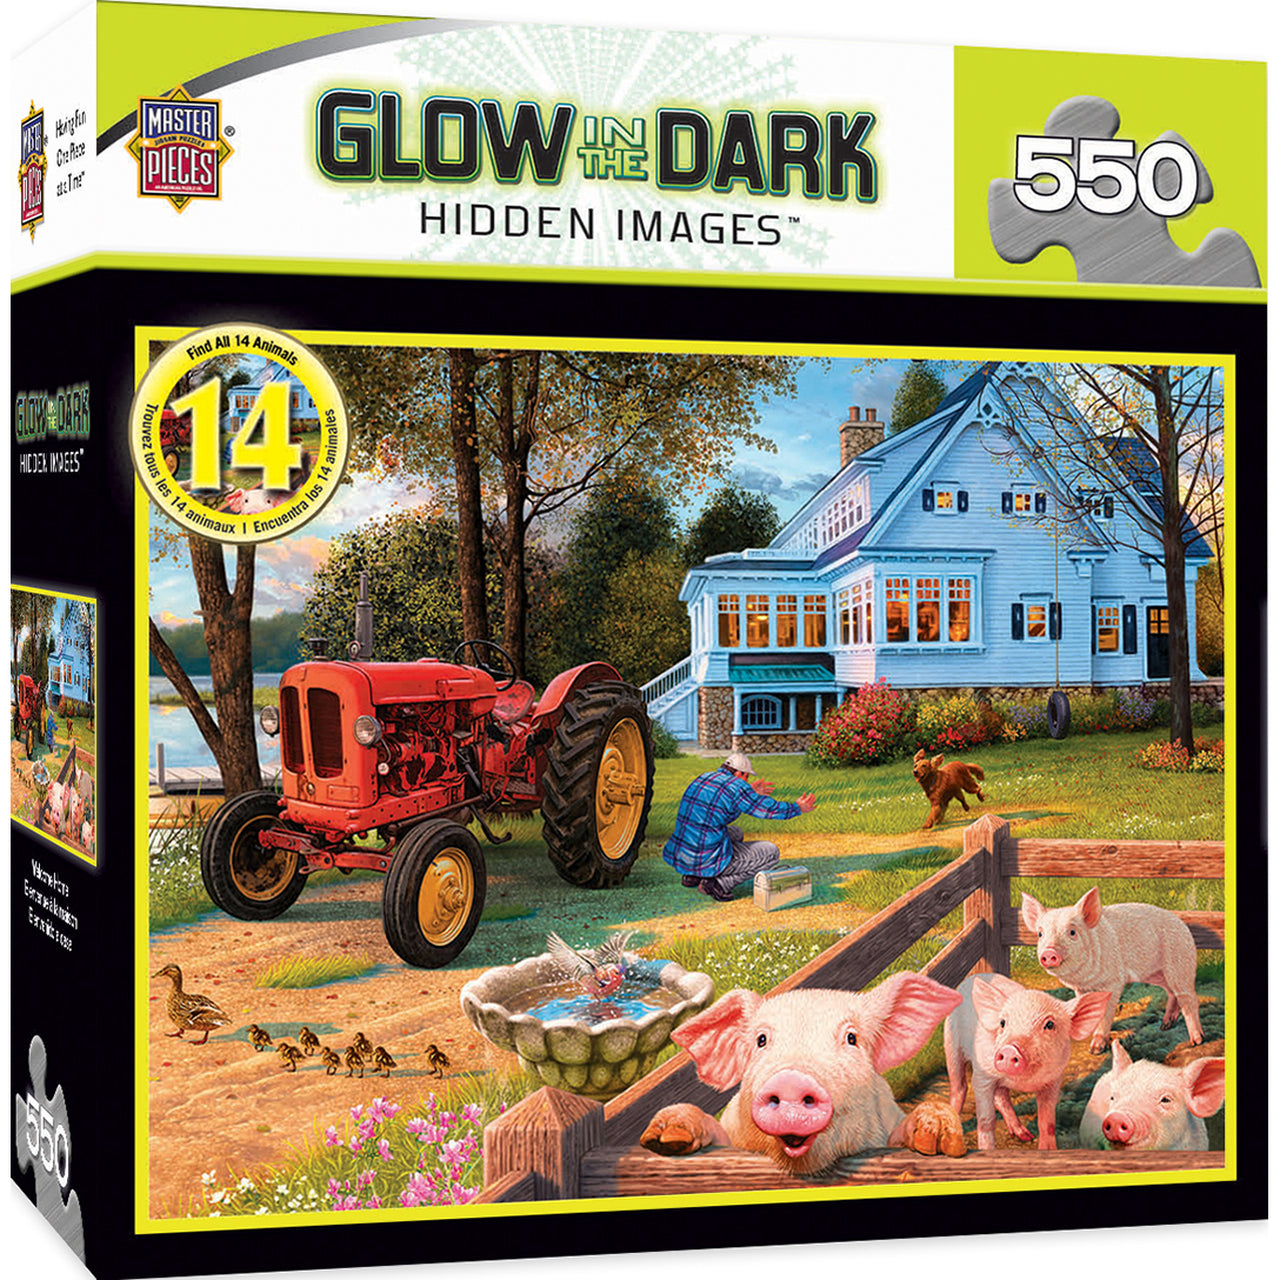 Glow in the Dark Puzzle 550pc